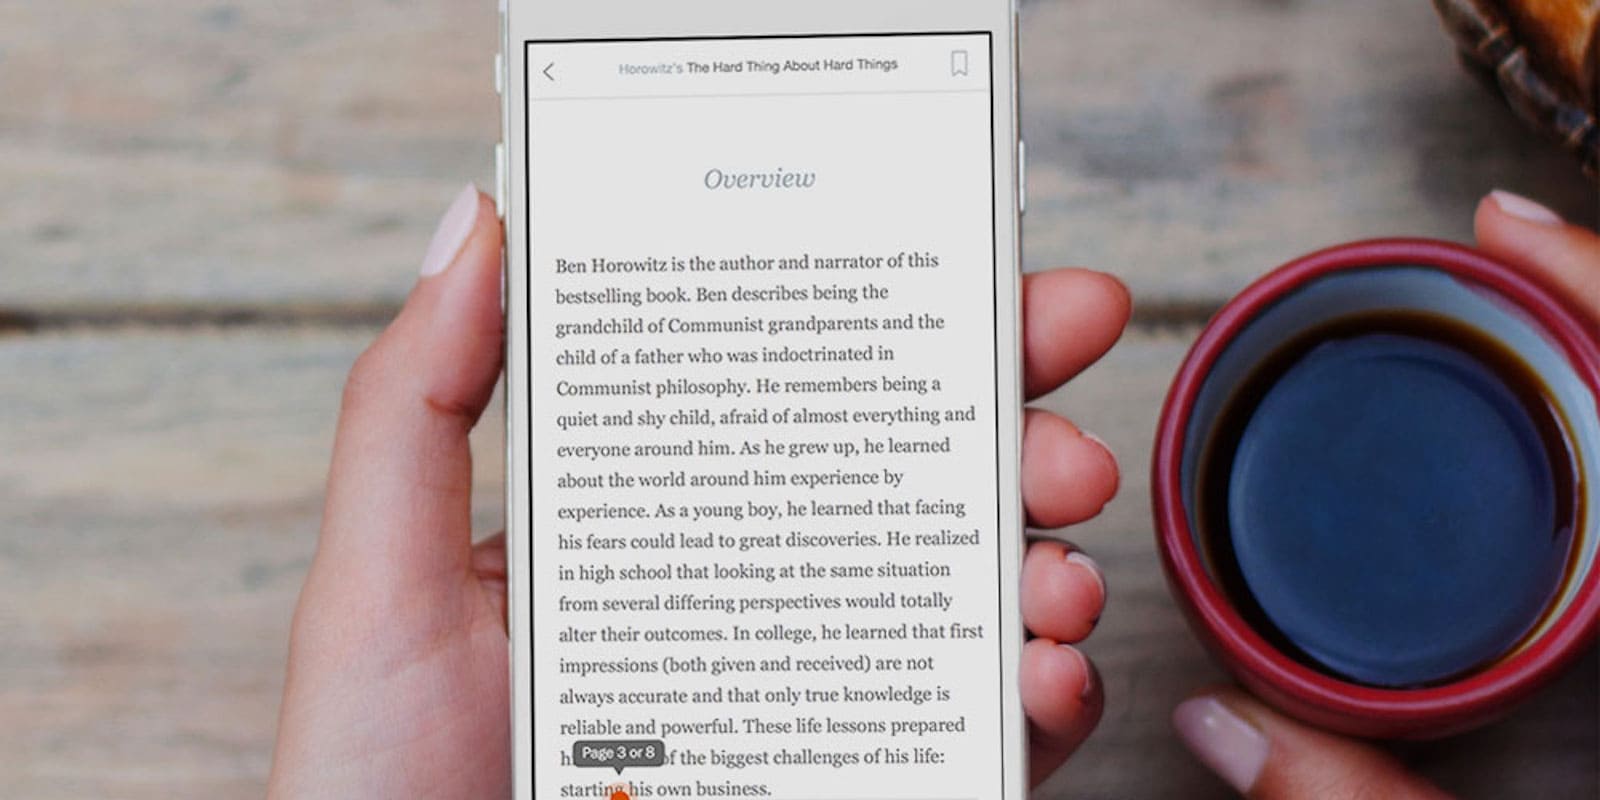 Cut that reading list down to size by dramatically cutting down on reading time thanks to Instaread's thorough summaries.